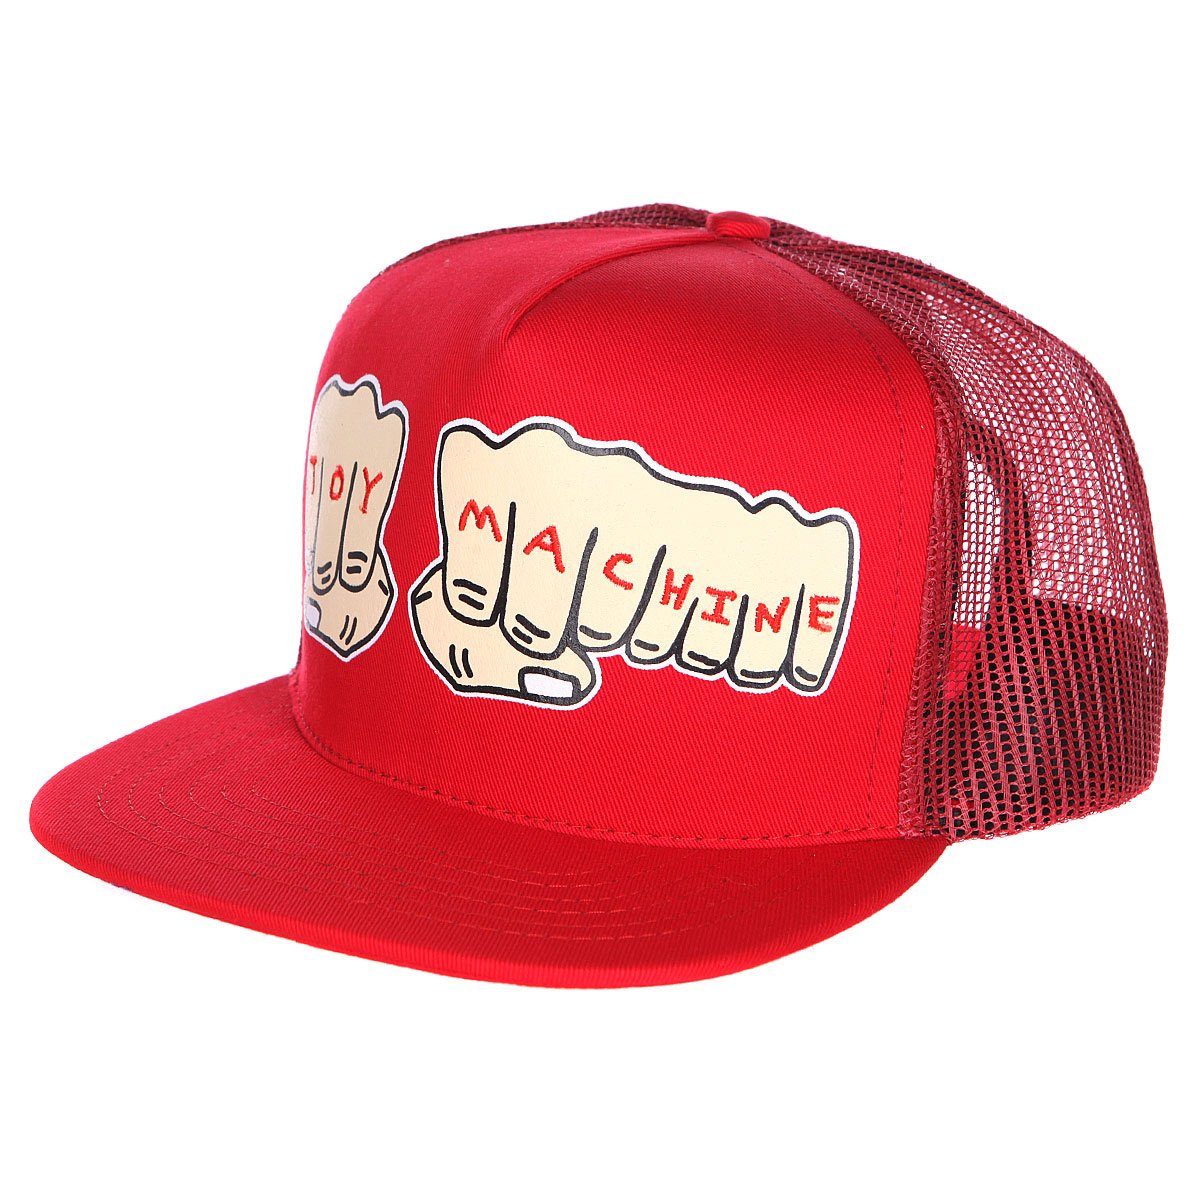 Toy Machine Fists Hat - Red - Invisible Board Shop